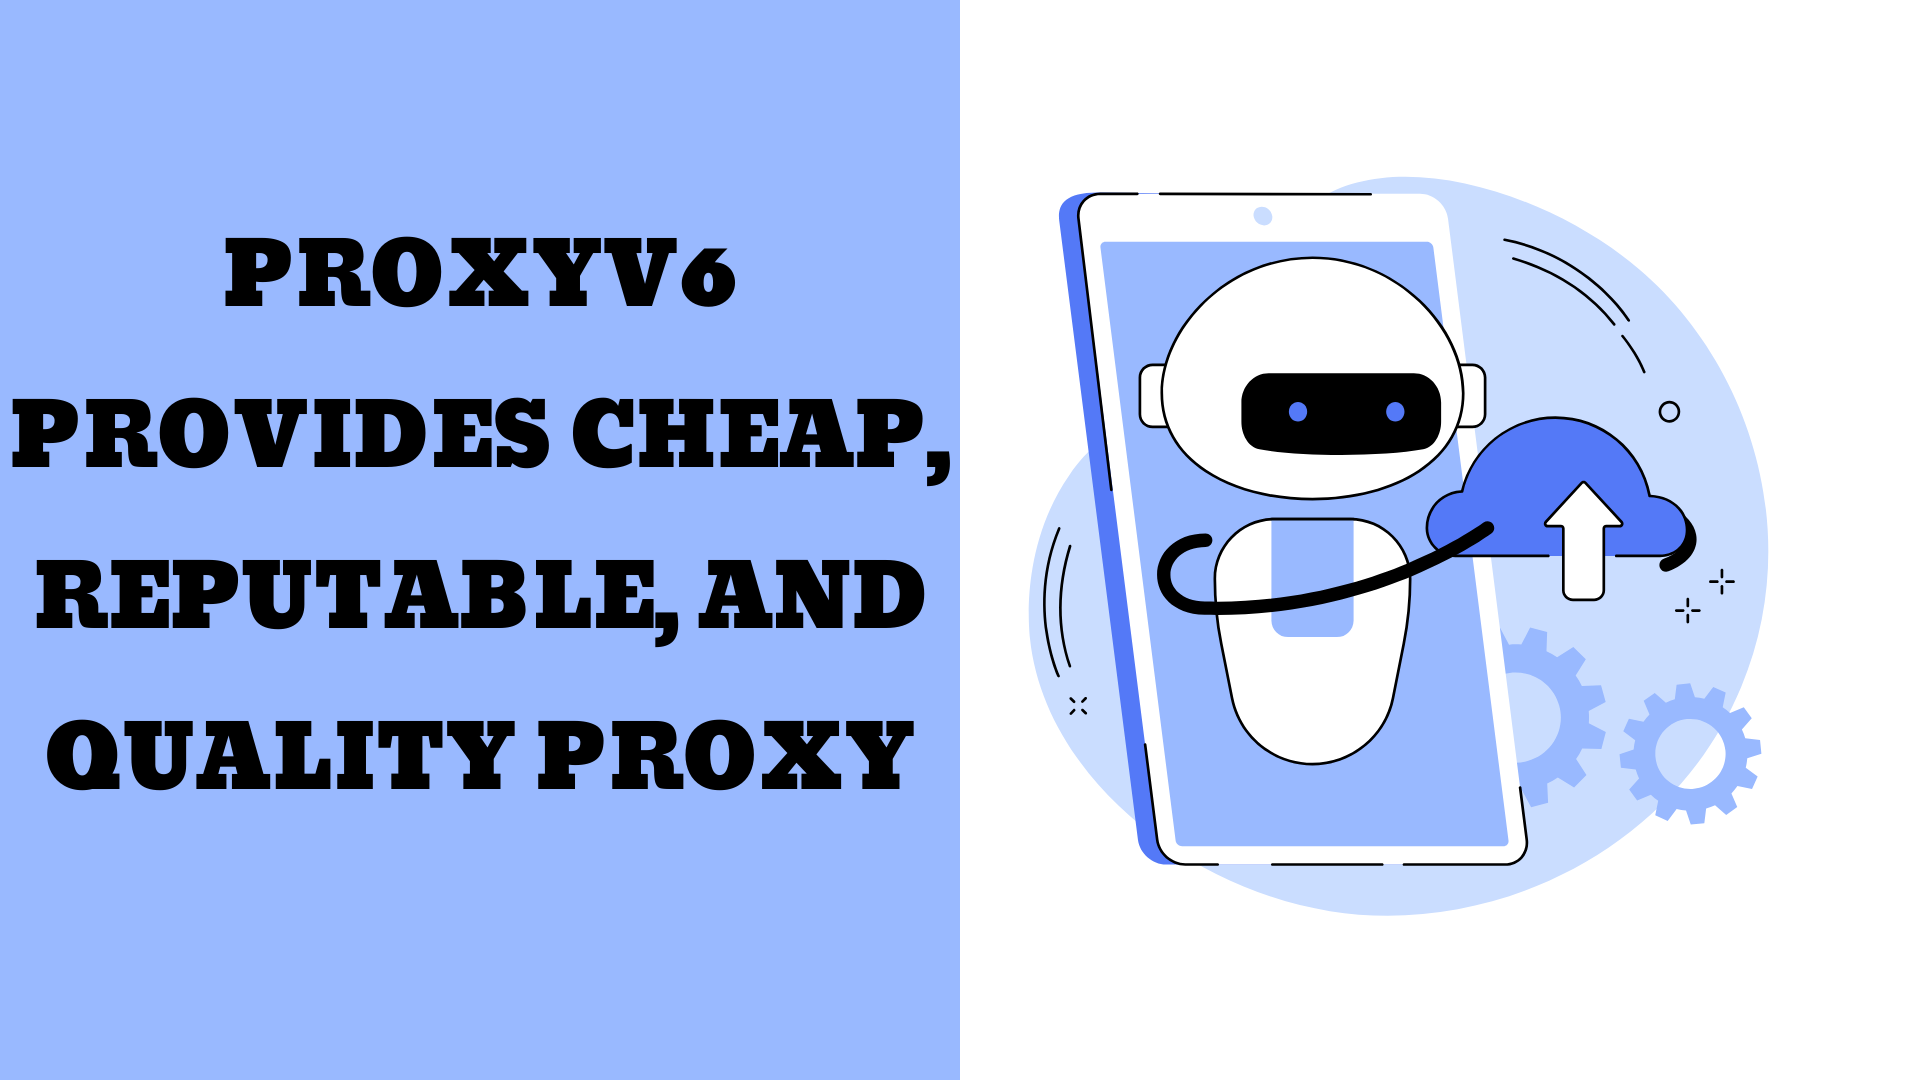 Proxyv6 provides cheap, reputable, and quality Proxy